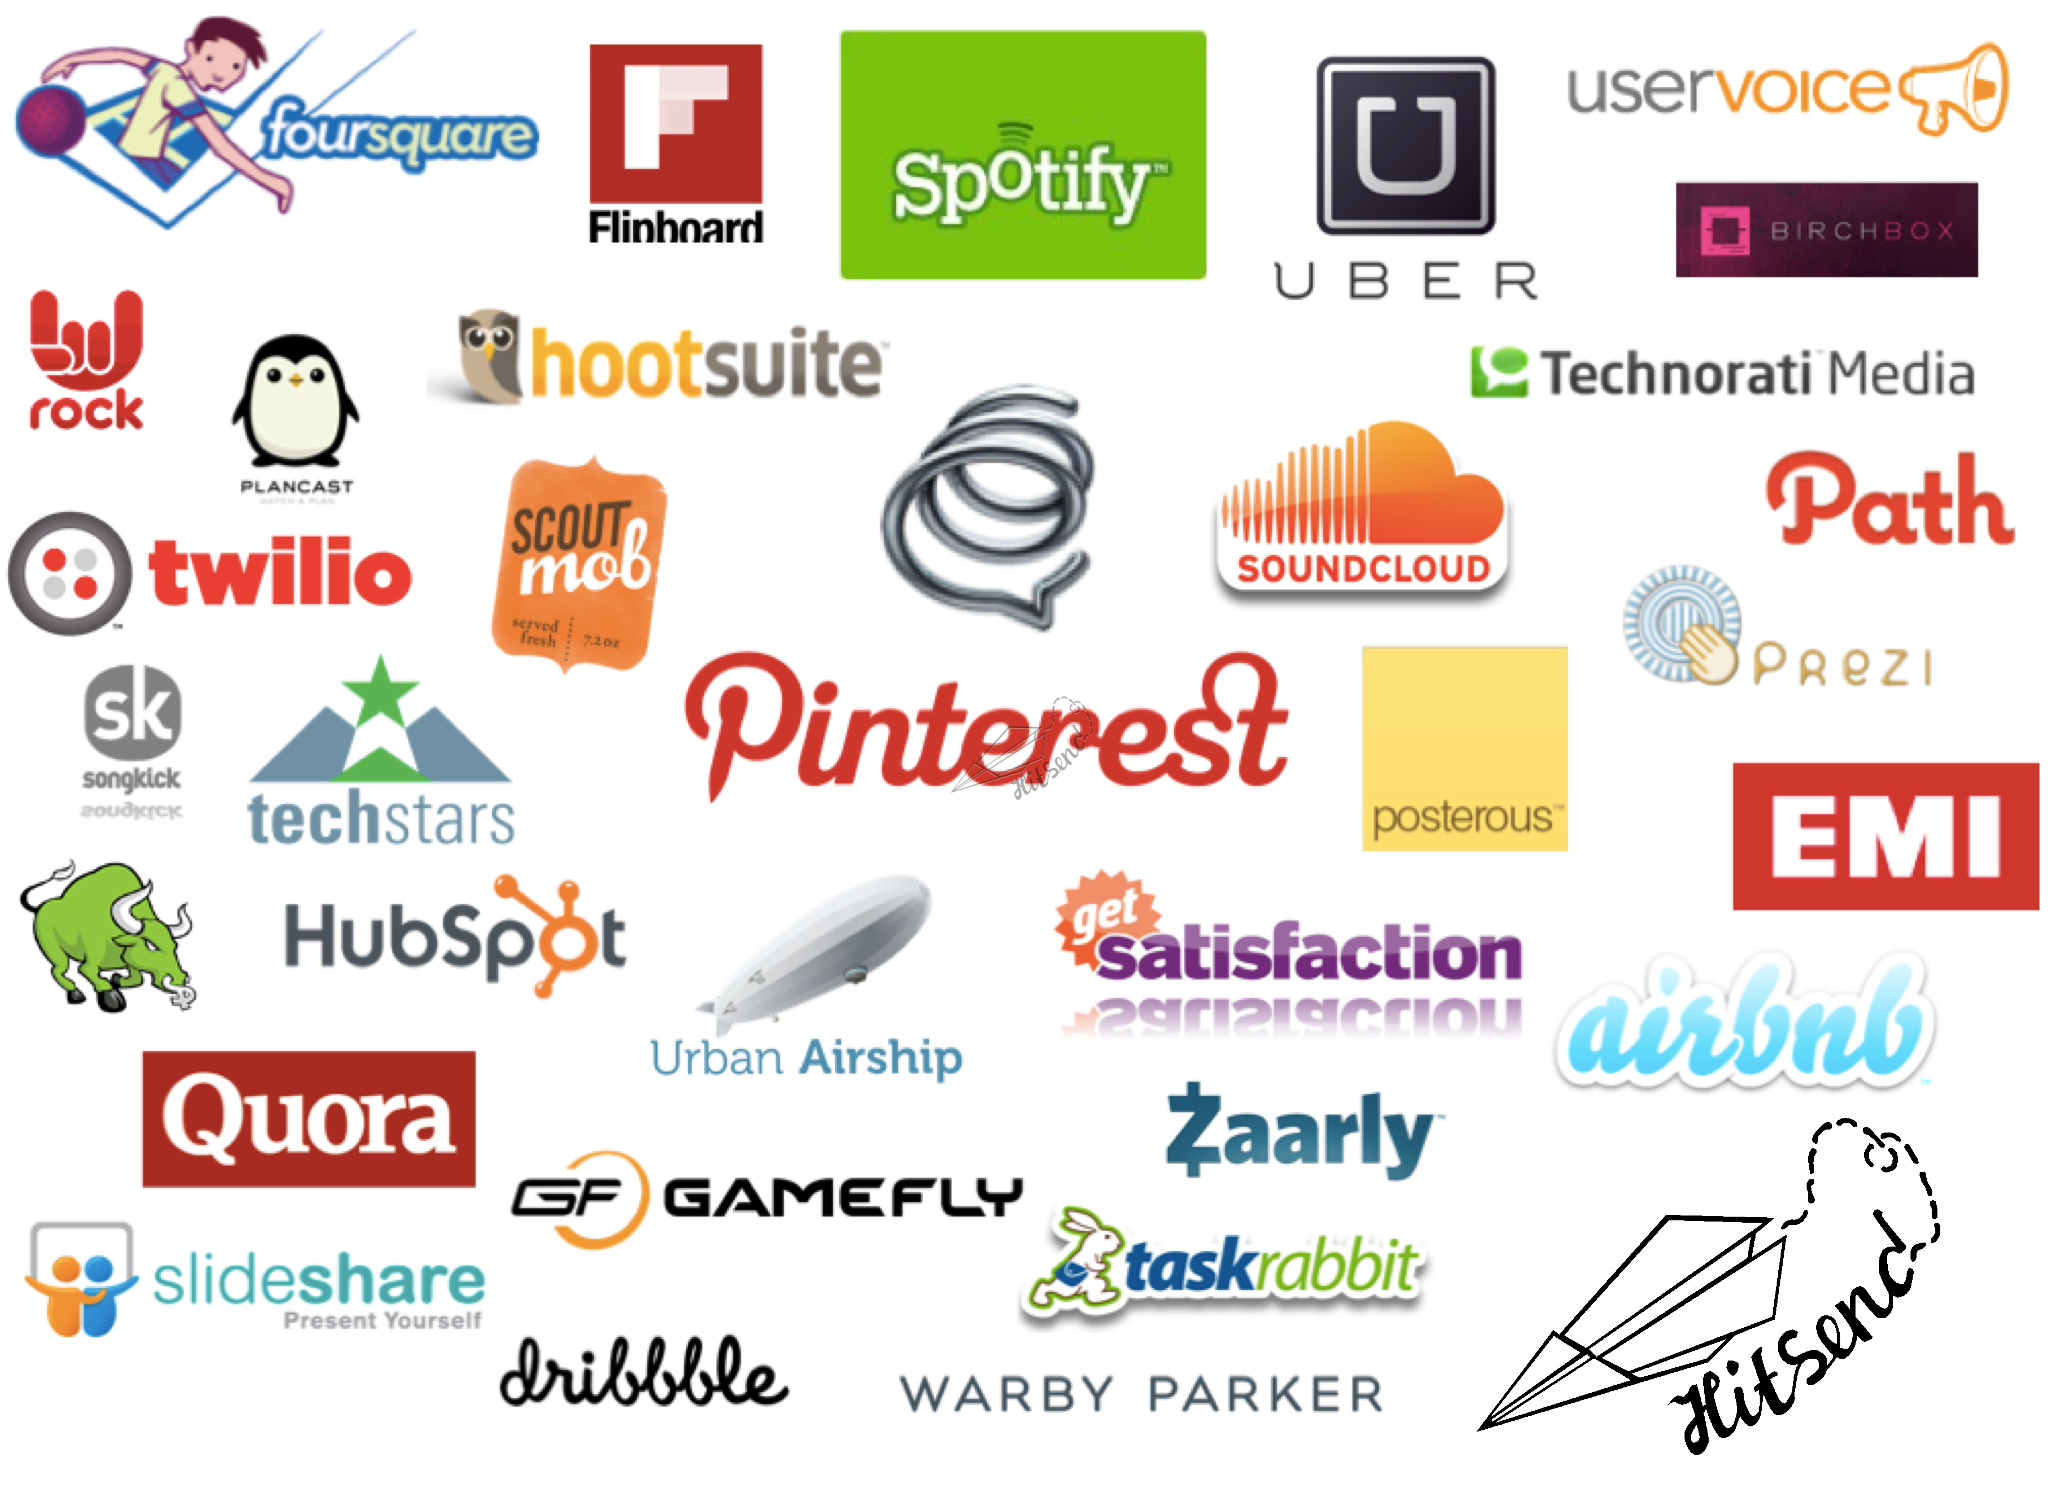 customer logos: Pinterest, Twilio, TechStars, Foursqure, Spotify, Uber, Path, airbnb and more!